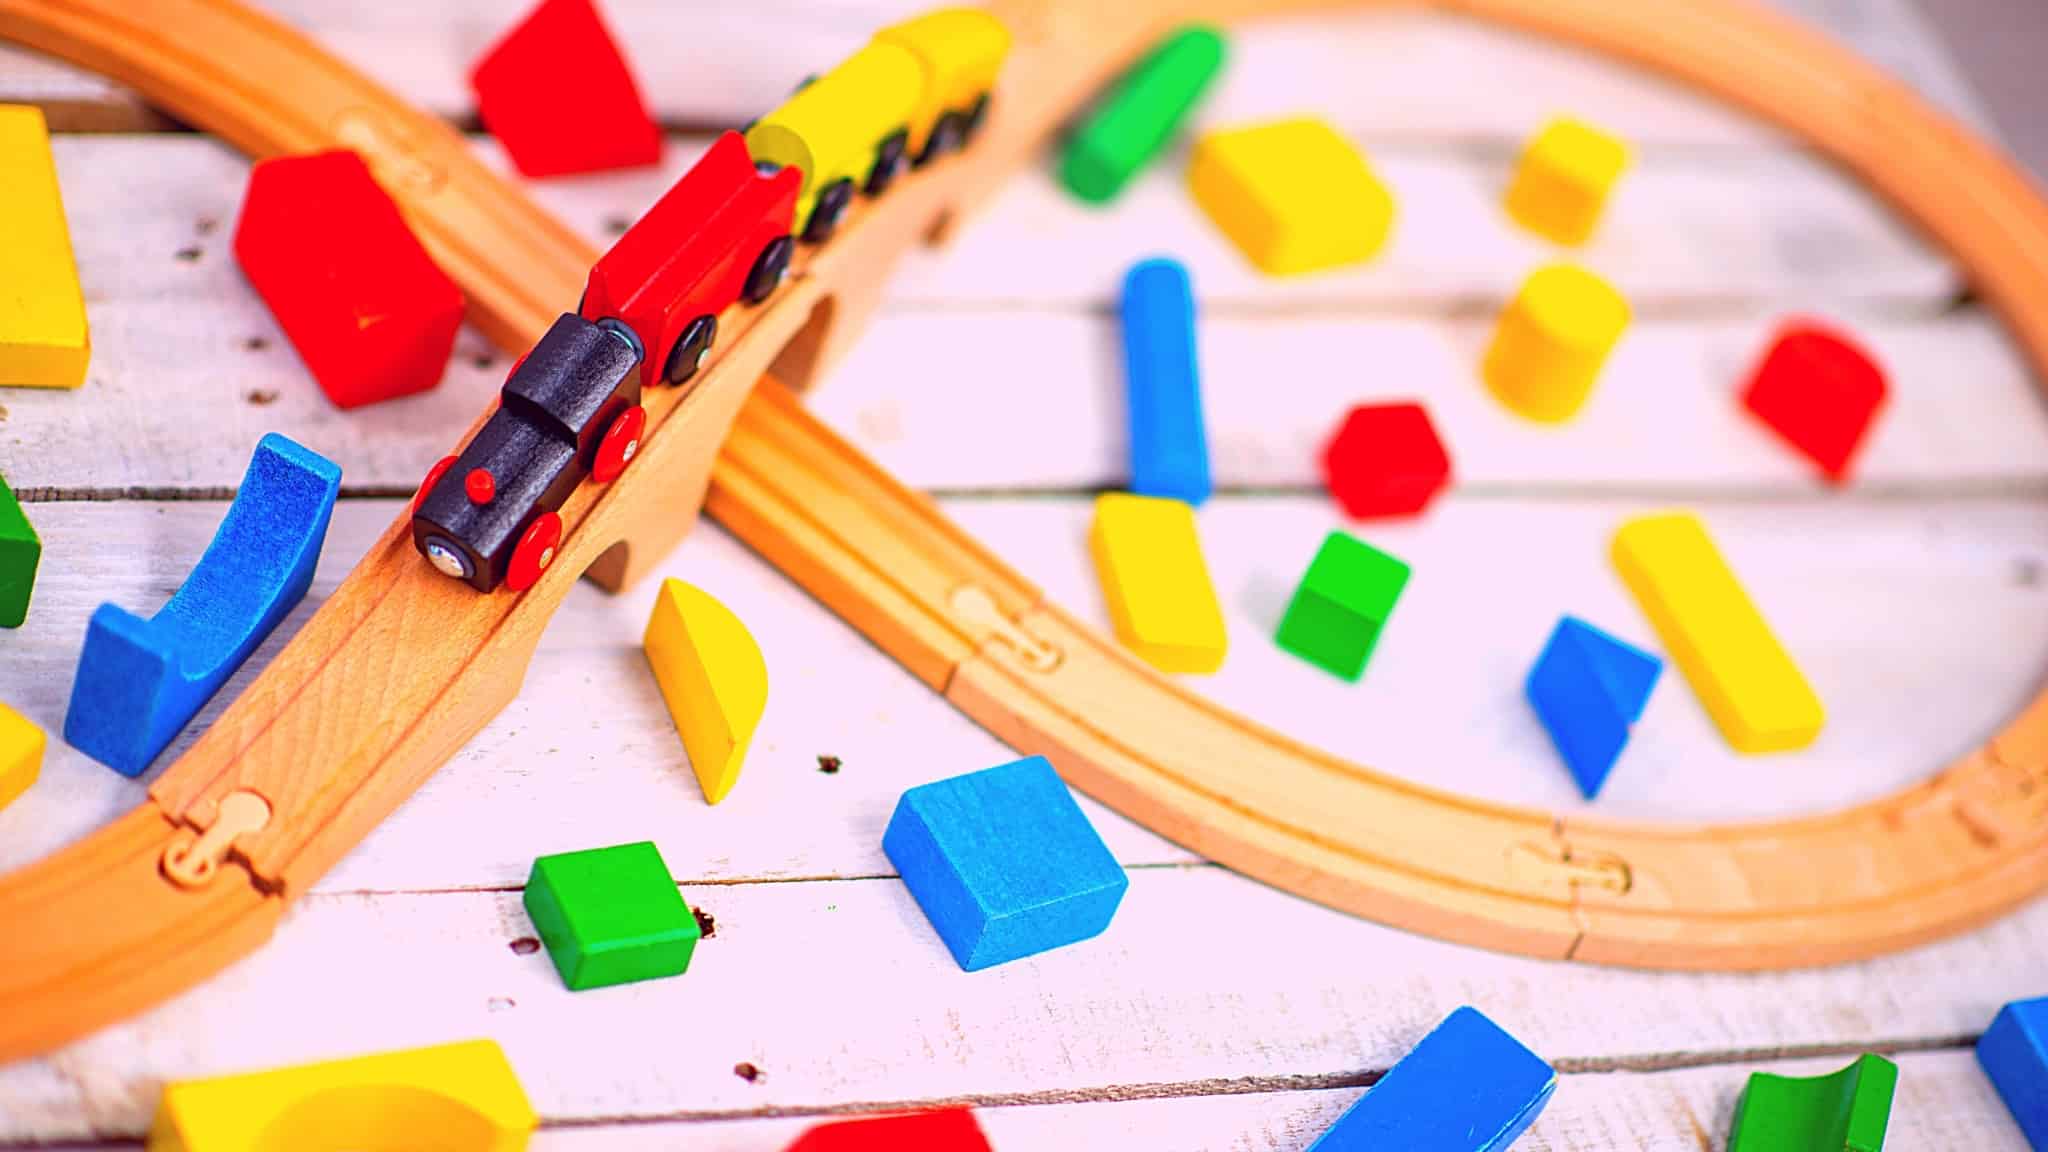 Best toy wooden train sets reviewed